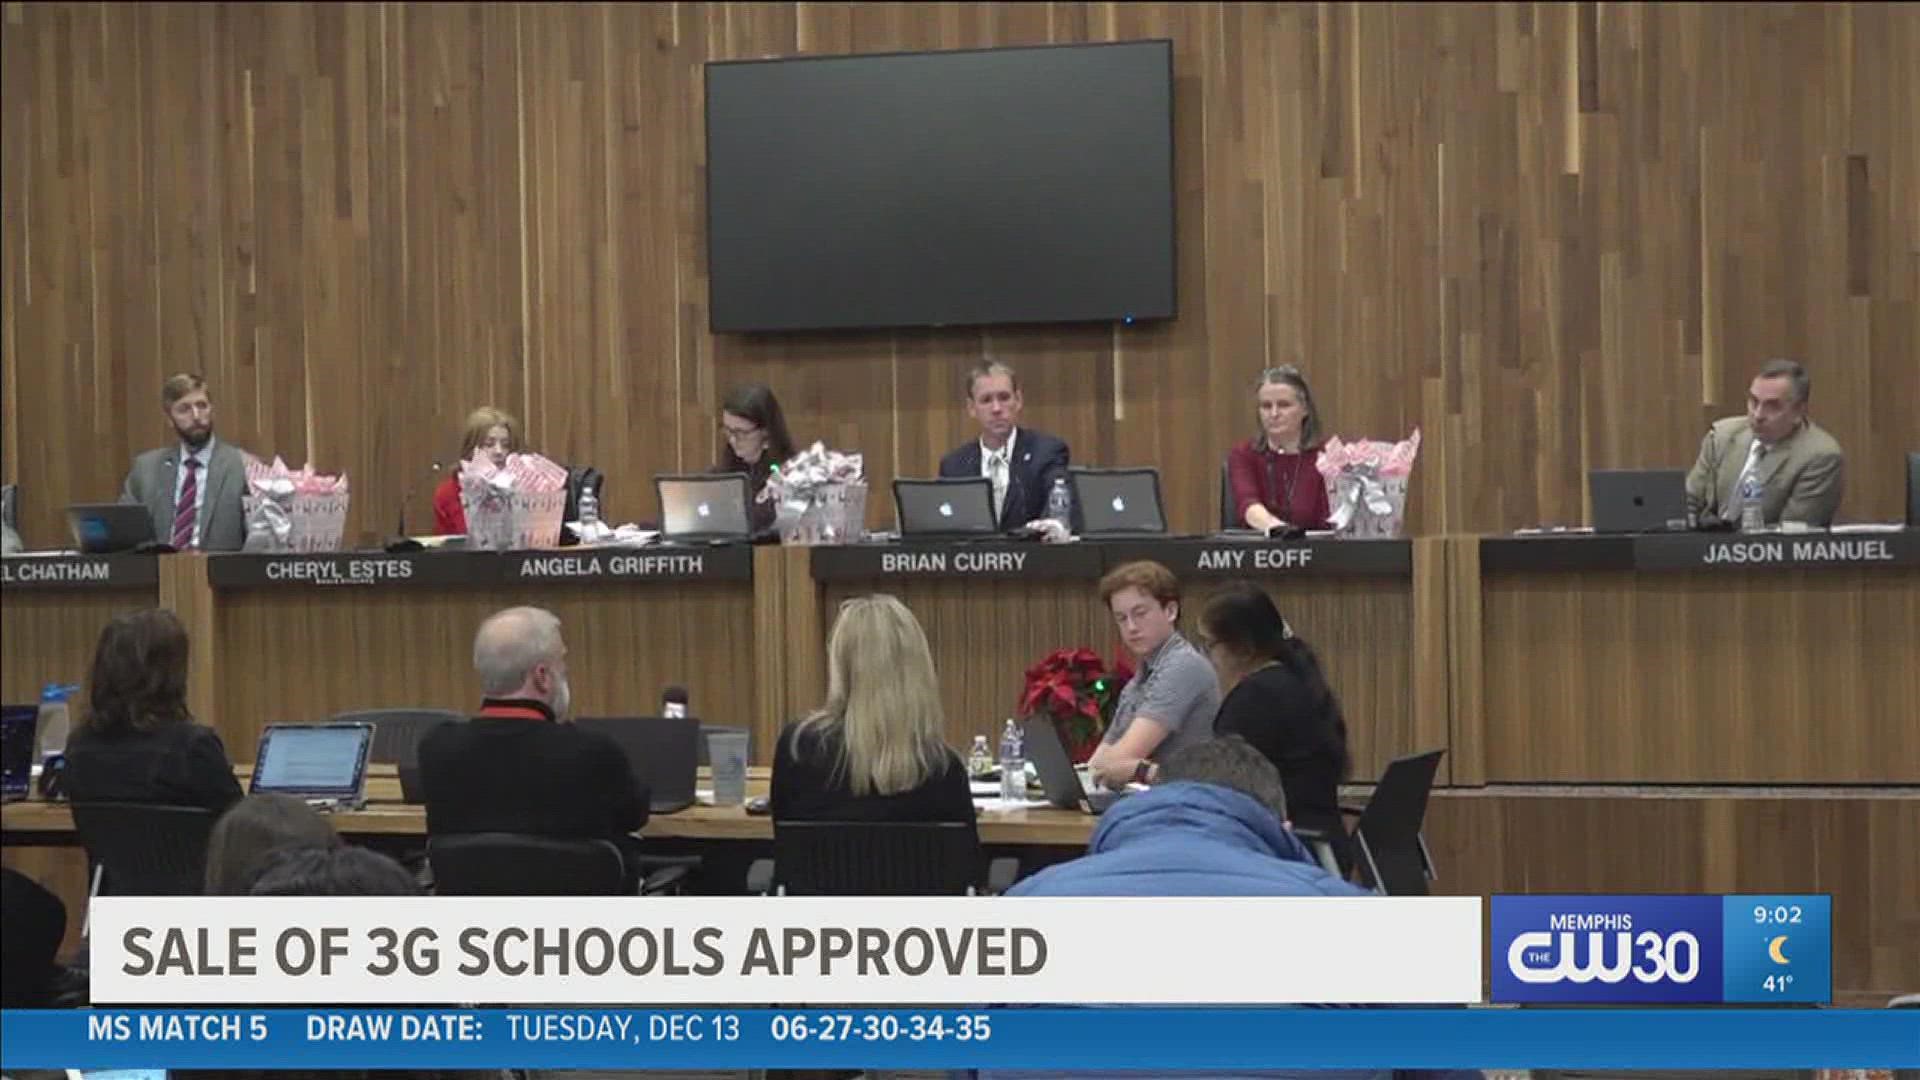 With the two school districts approving the plan, the final vote before the agreement will move forward has passed.